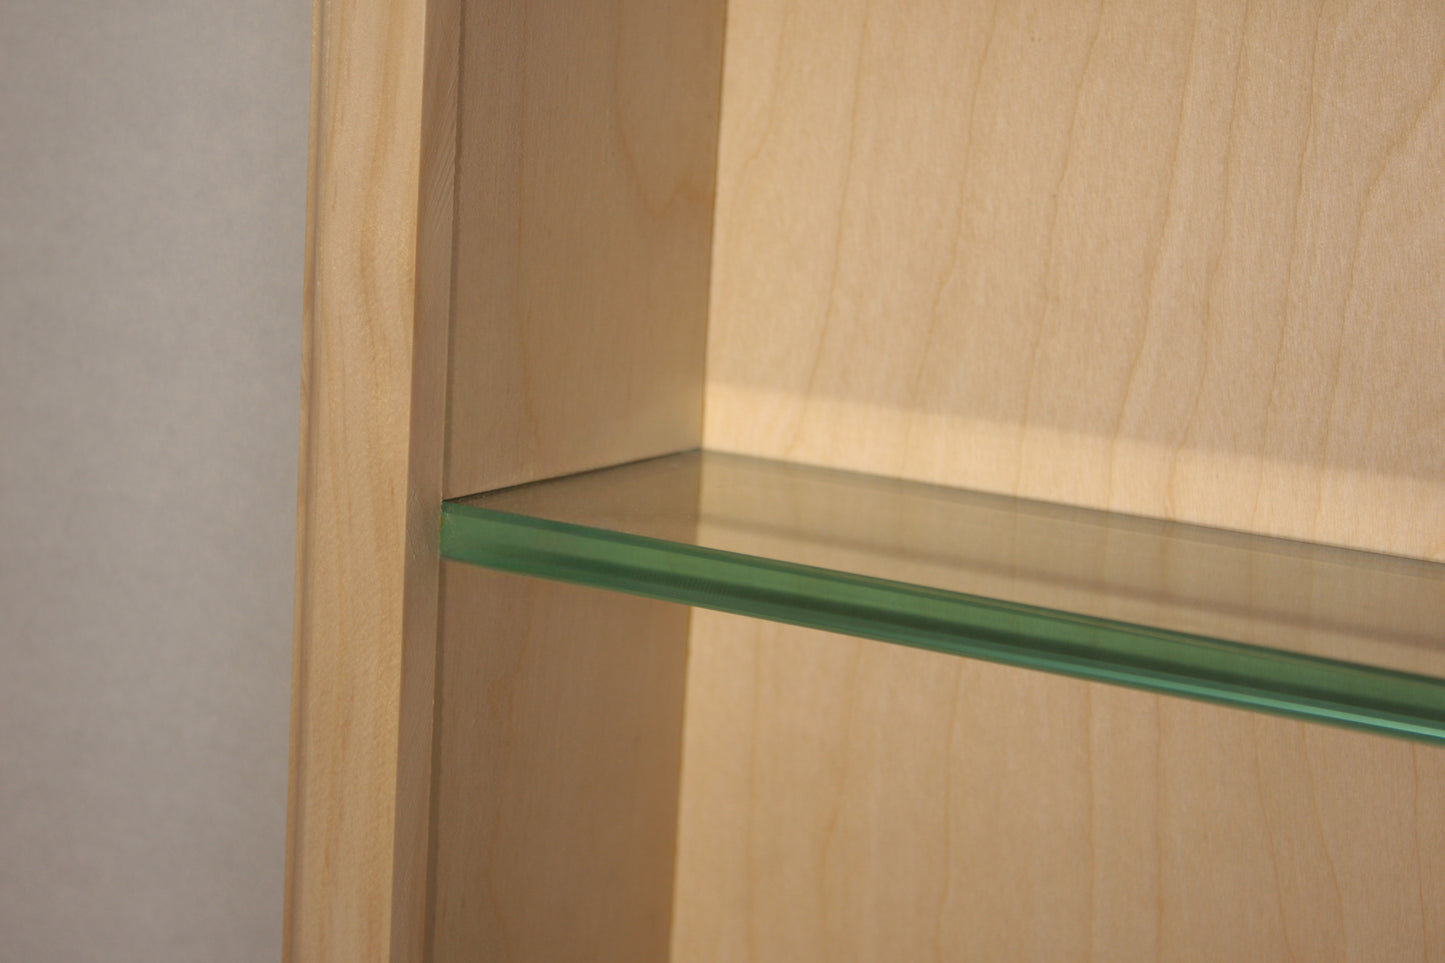 Recessed Wall Storage With Glass Shelves | 24x14 |